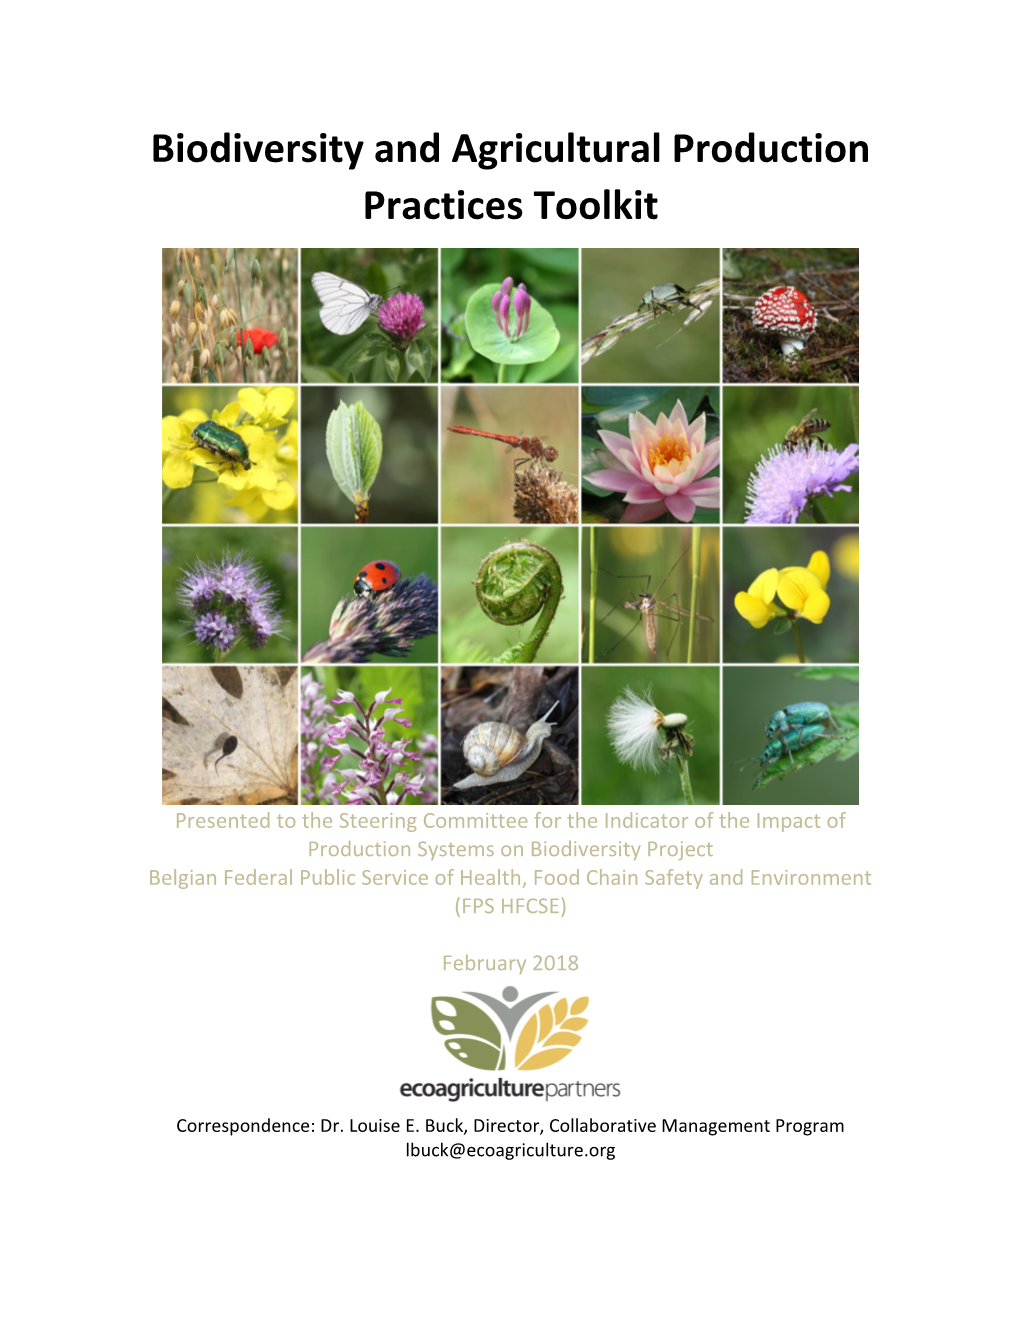 Biodiversity and Agricultural Production Practices Toolkit